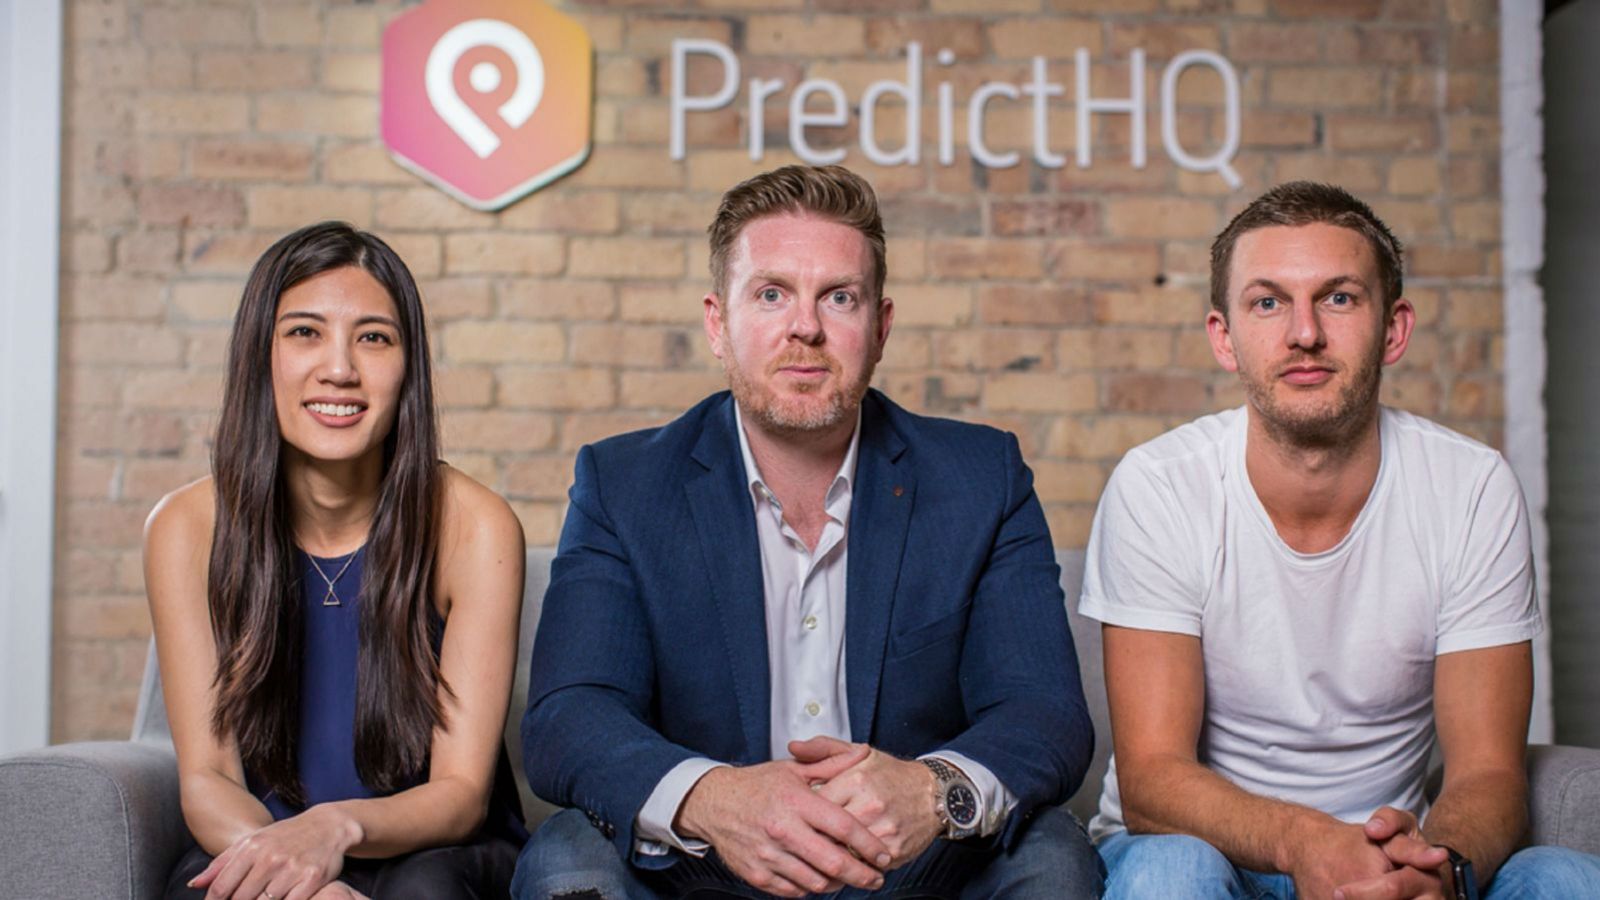 Yen Lim, Campbell Brown and Rob Kern sit next to each other on a sofa with a brick wall, company logo and words 'PredictHQ' behind them.